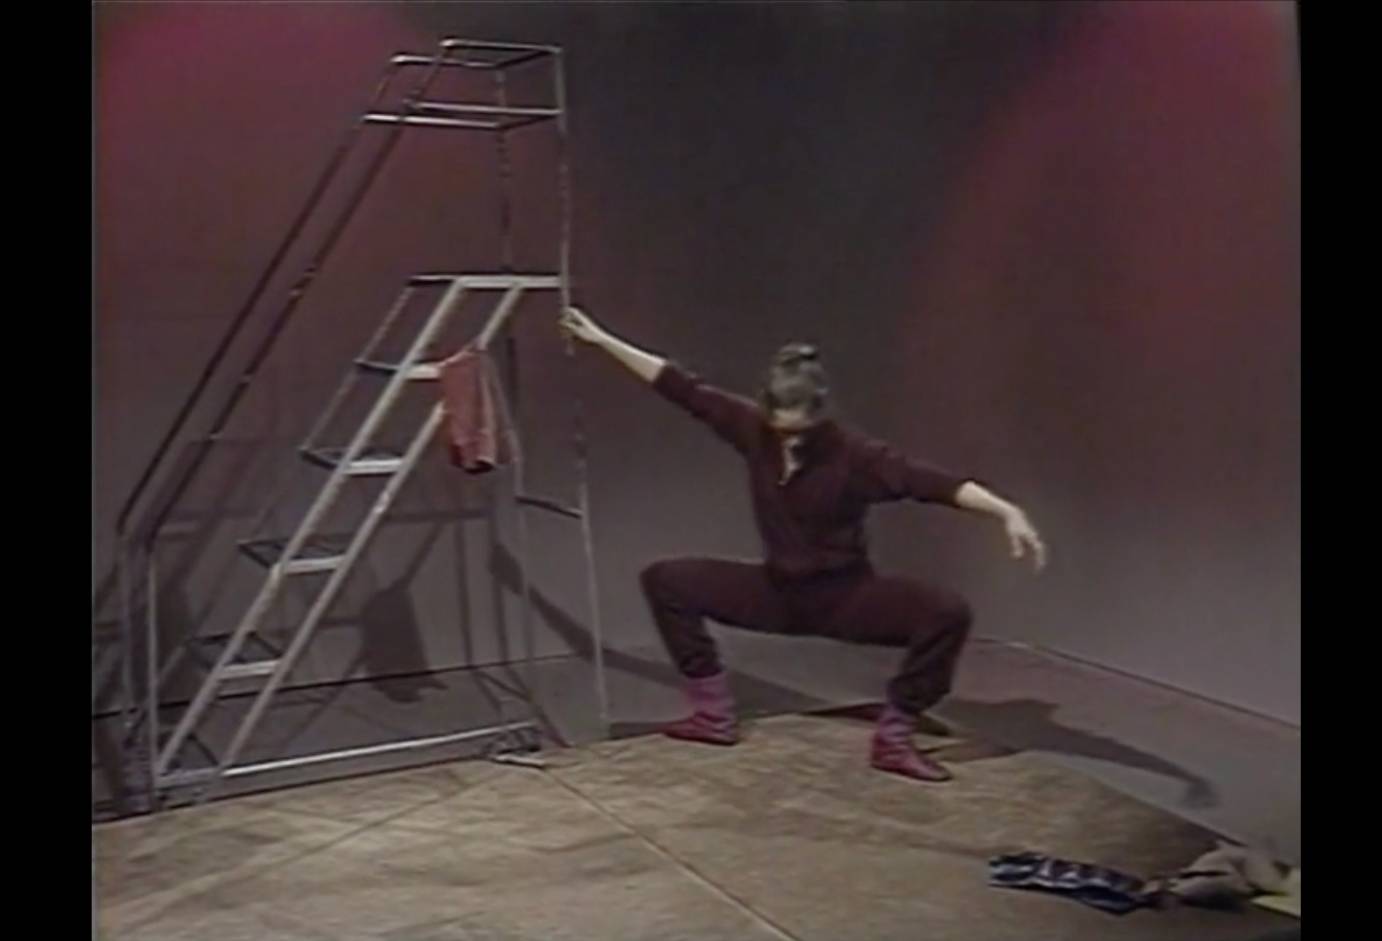 a ballerina, white woman with light hair up in a bun, holds on to a stage ladder, as she performs a deep knee bend. the walls behind her are a light burgundy and her warm up suit is a dark burgundy she is wearing a lighter colored dance warm up boot